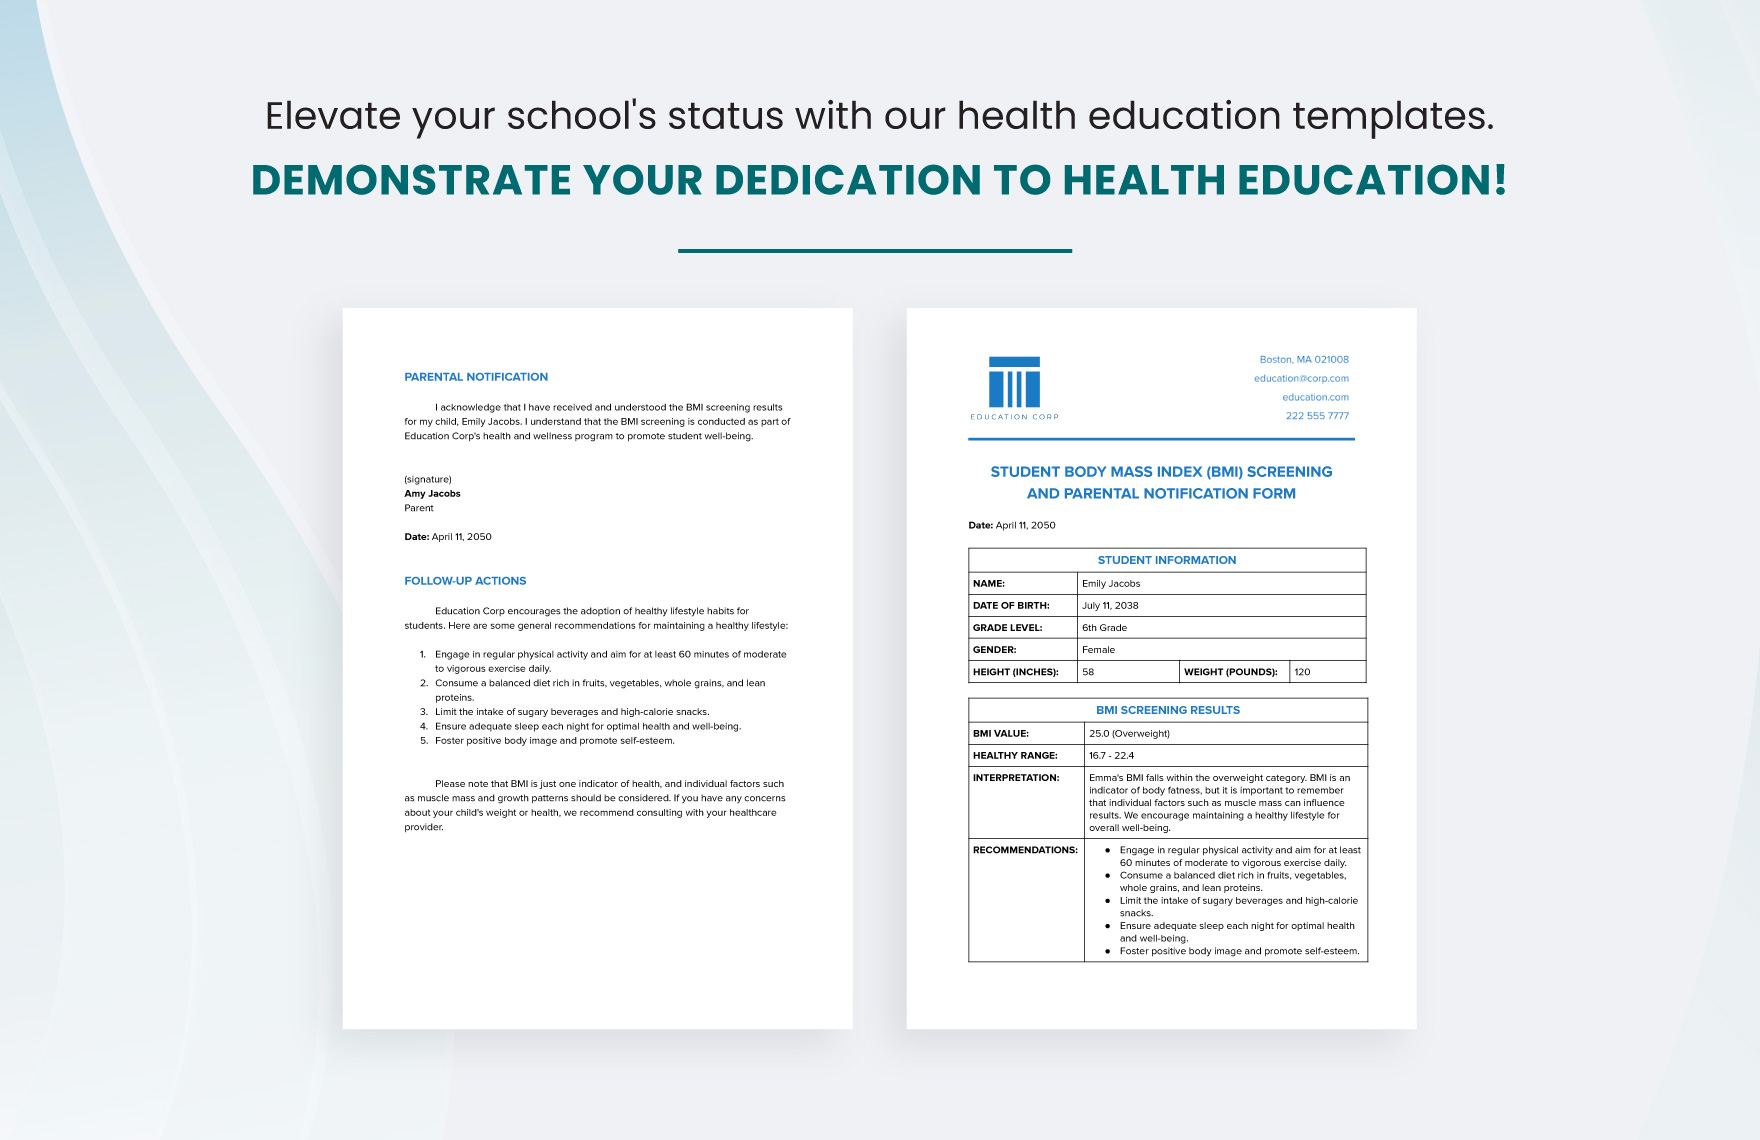 Student Body Mass Index (BMI) Screening and Parental Notification Form Template